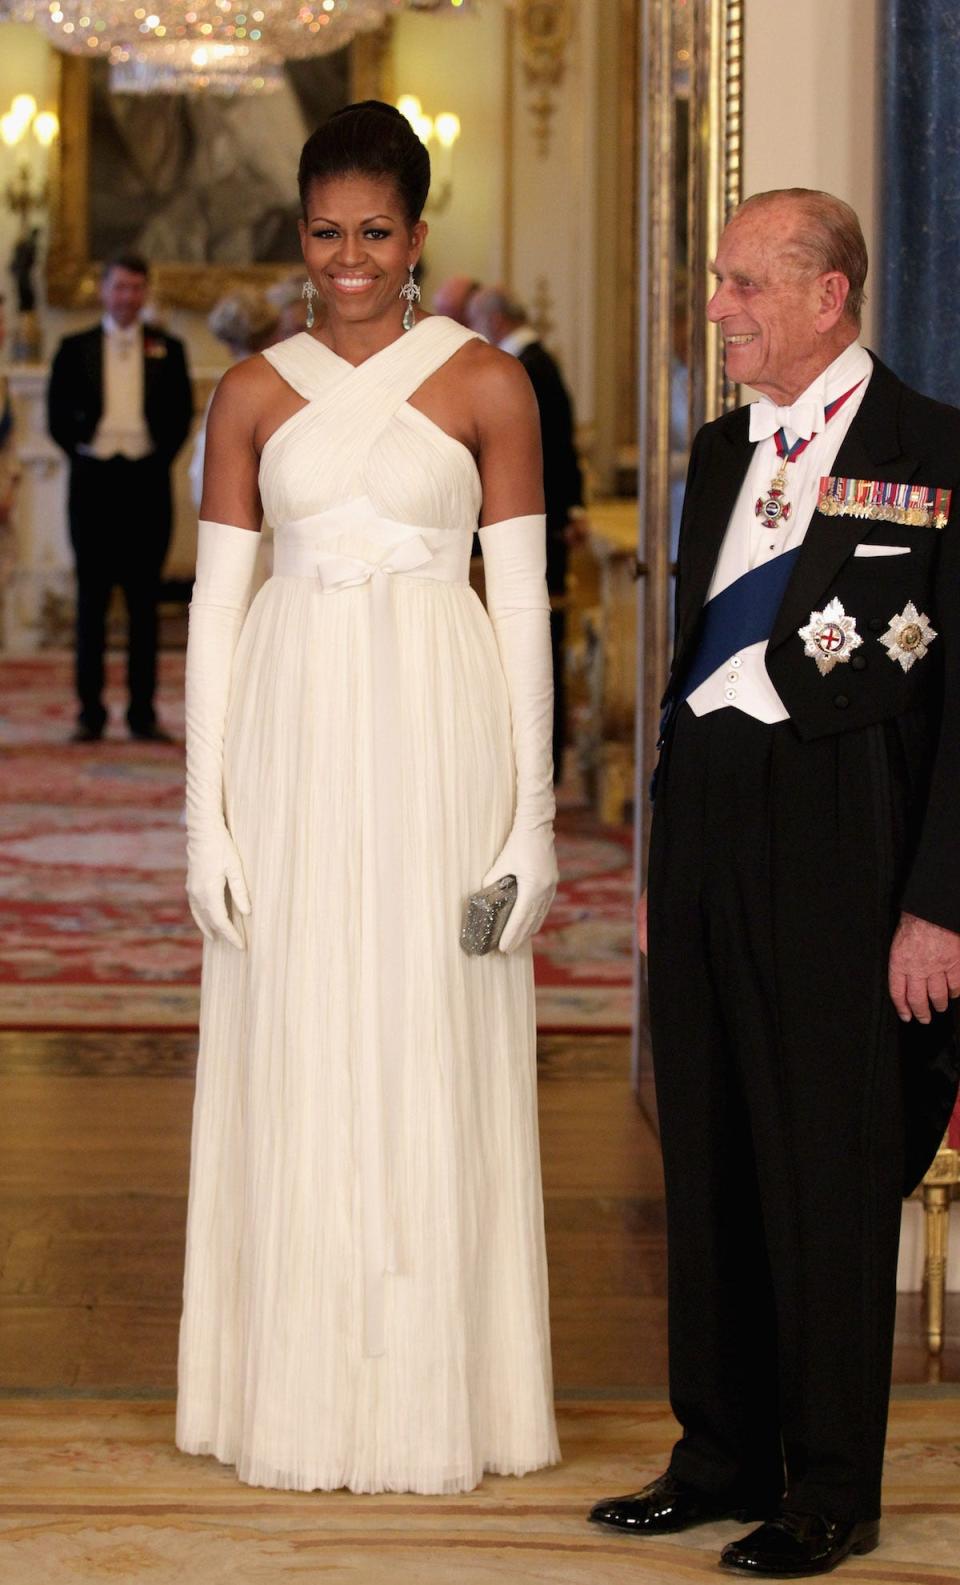 Michelle Obama wears a white dress and stands next to Prince Phillip.